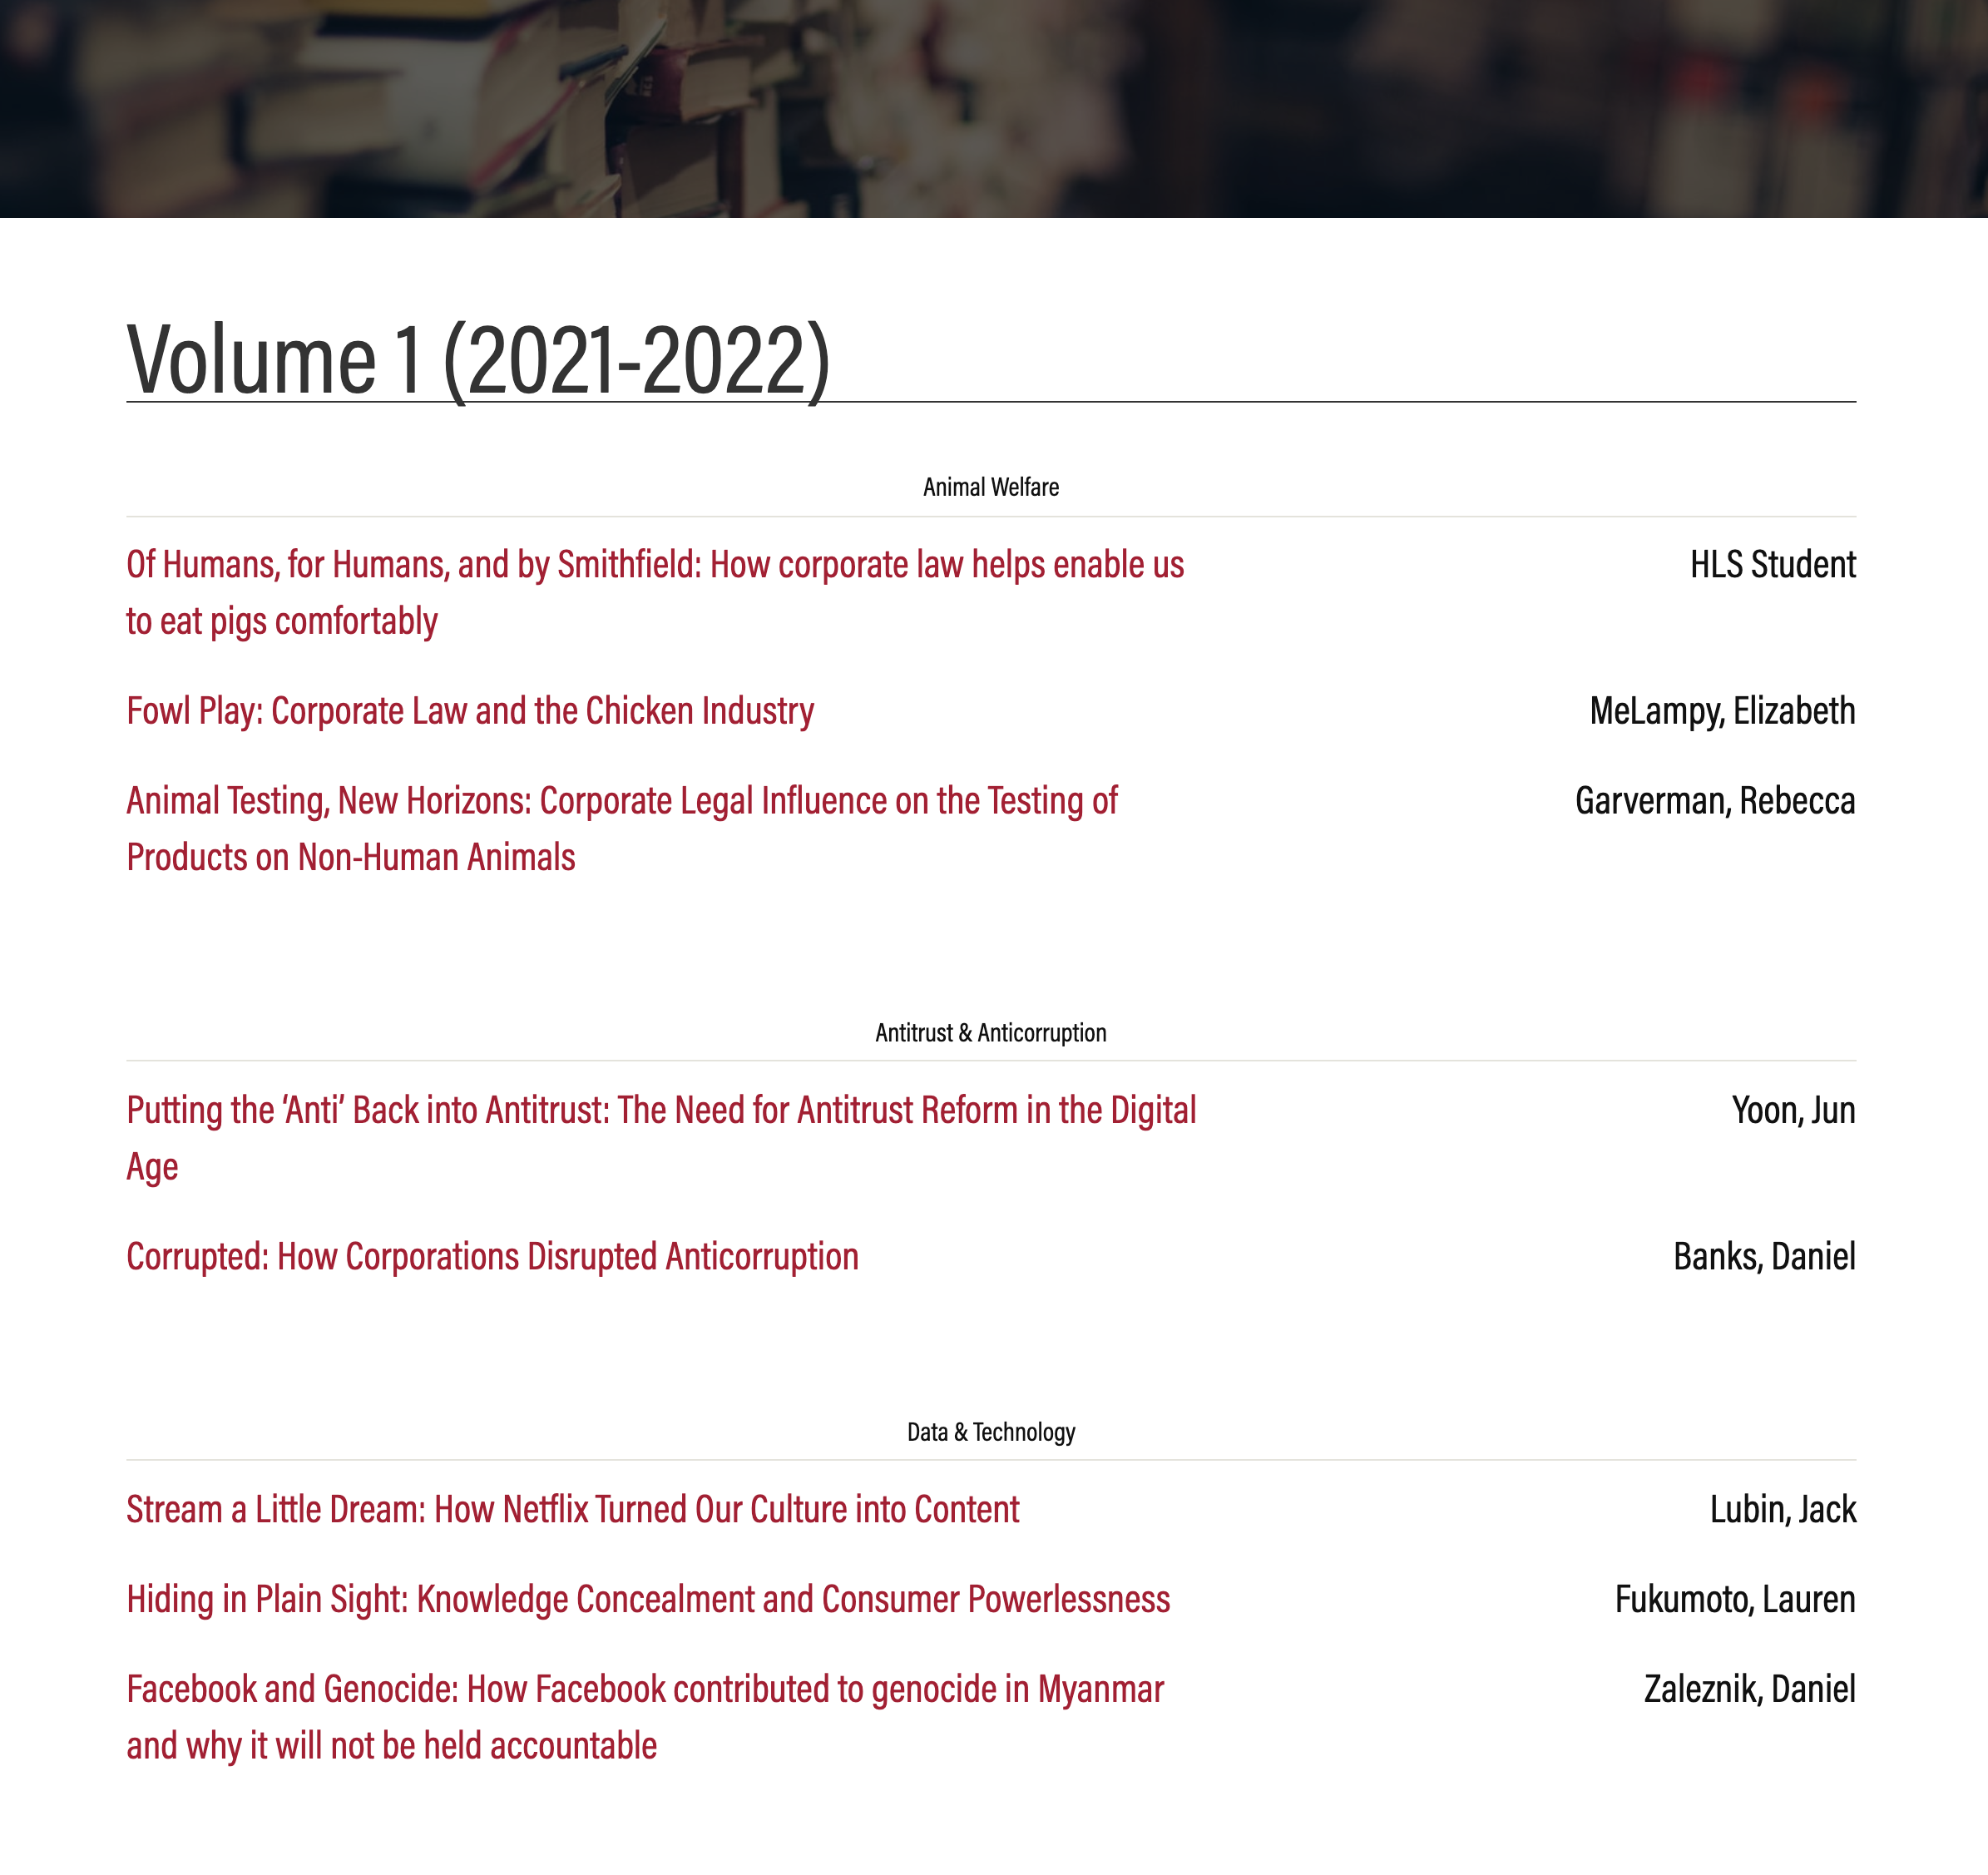 Harvard Law School - Systemic Justice Project: Harvard Law School Systemic Justice Project - Journal Volume